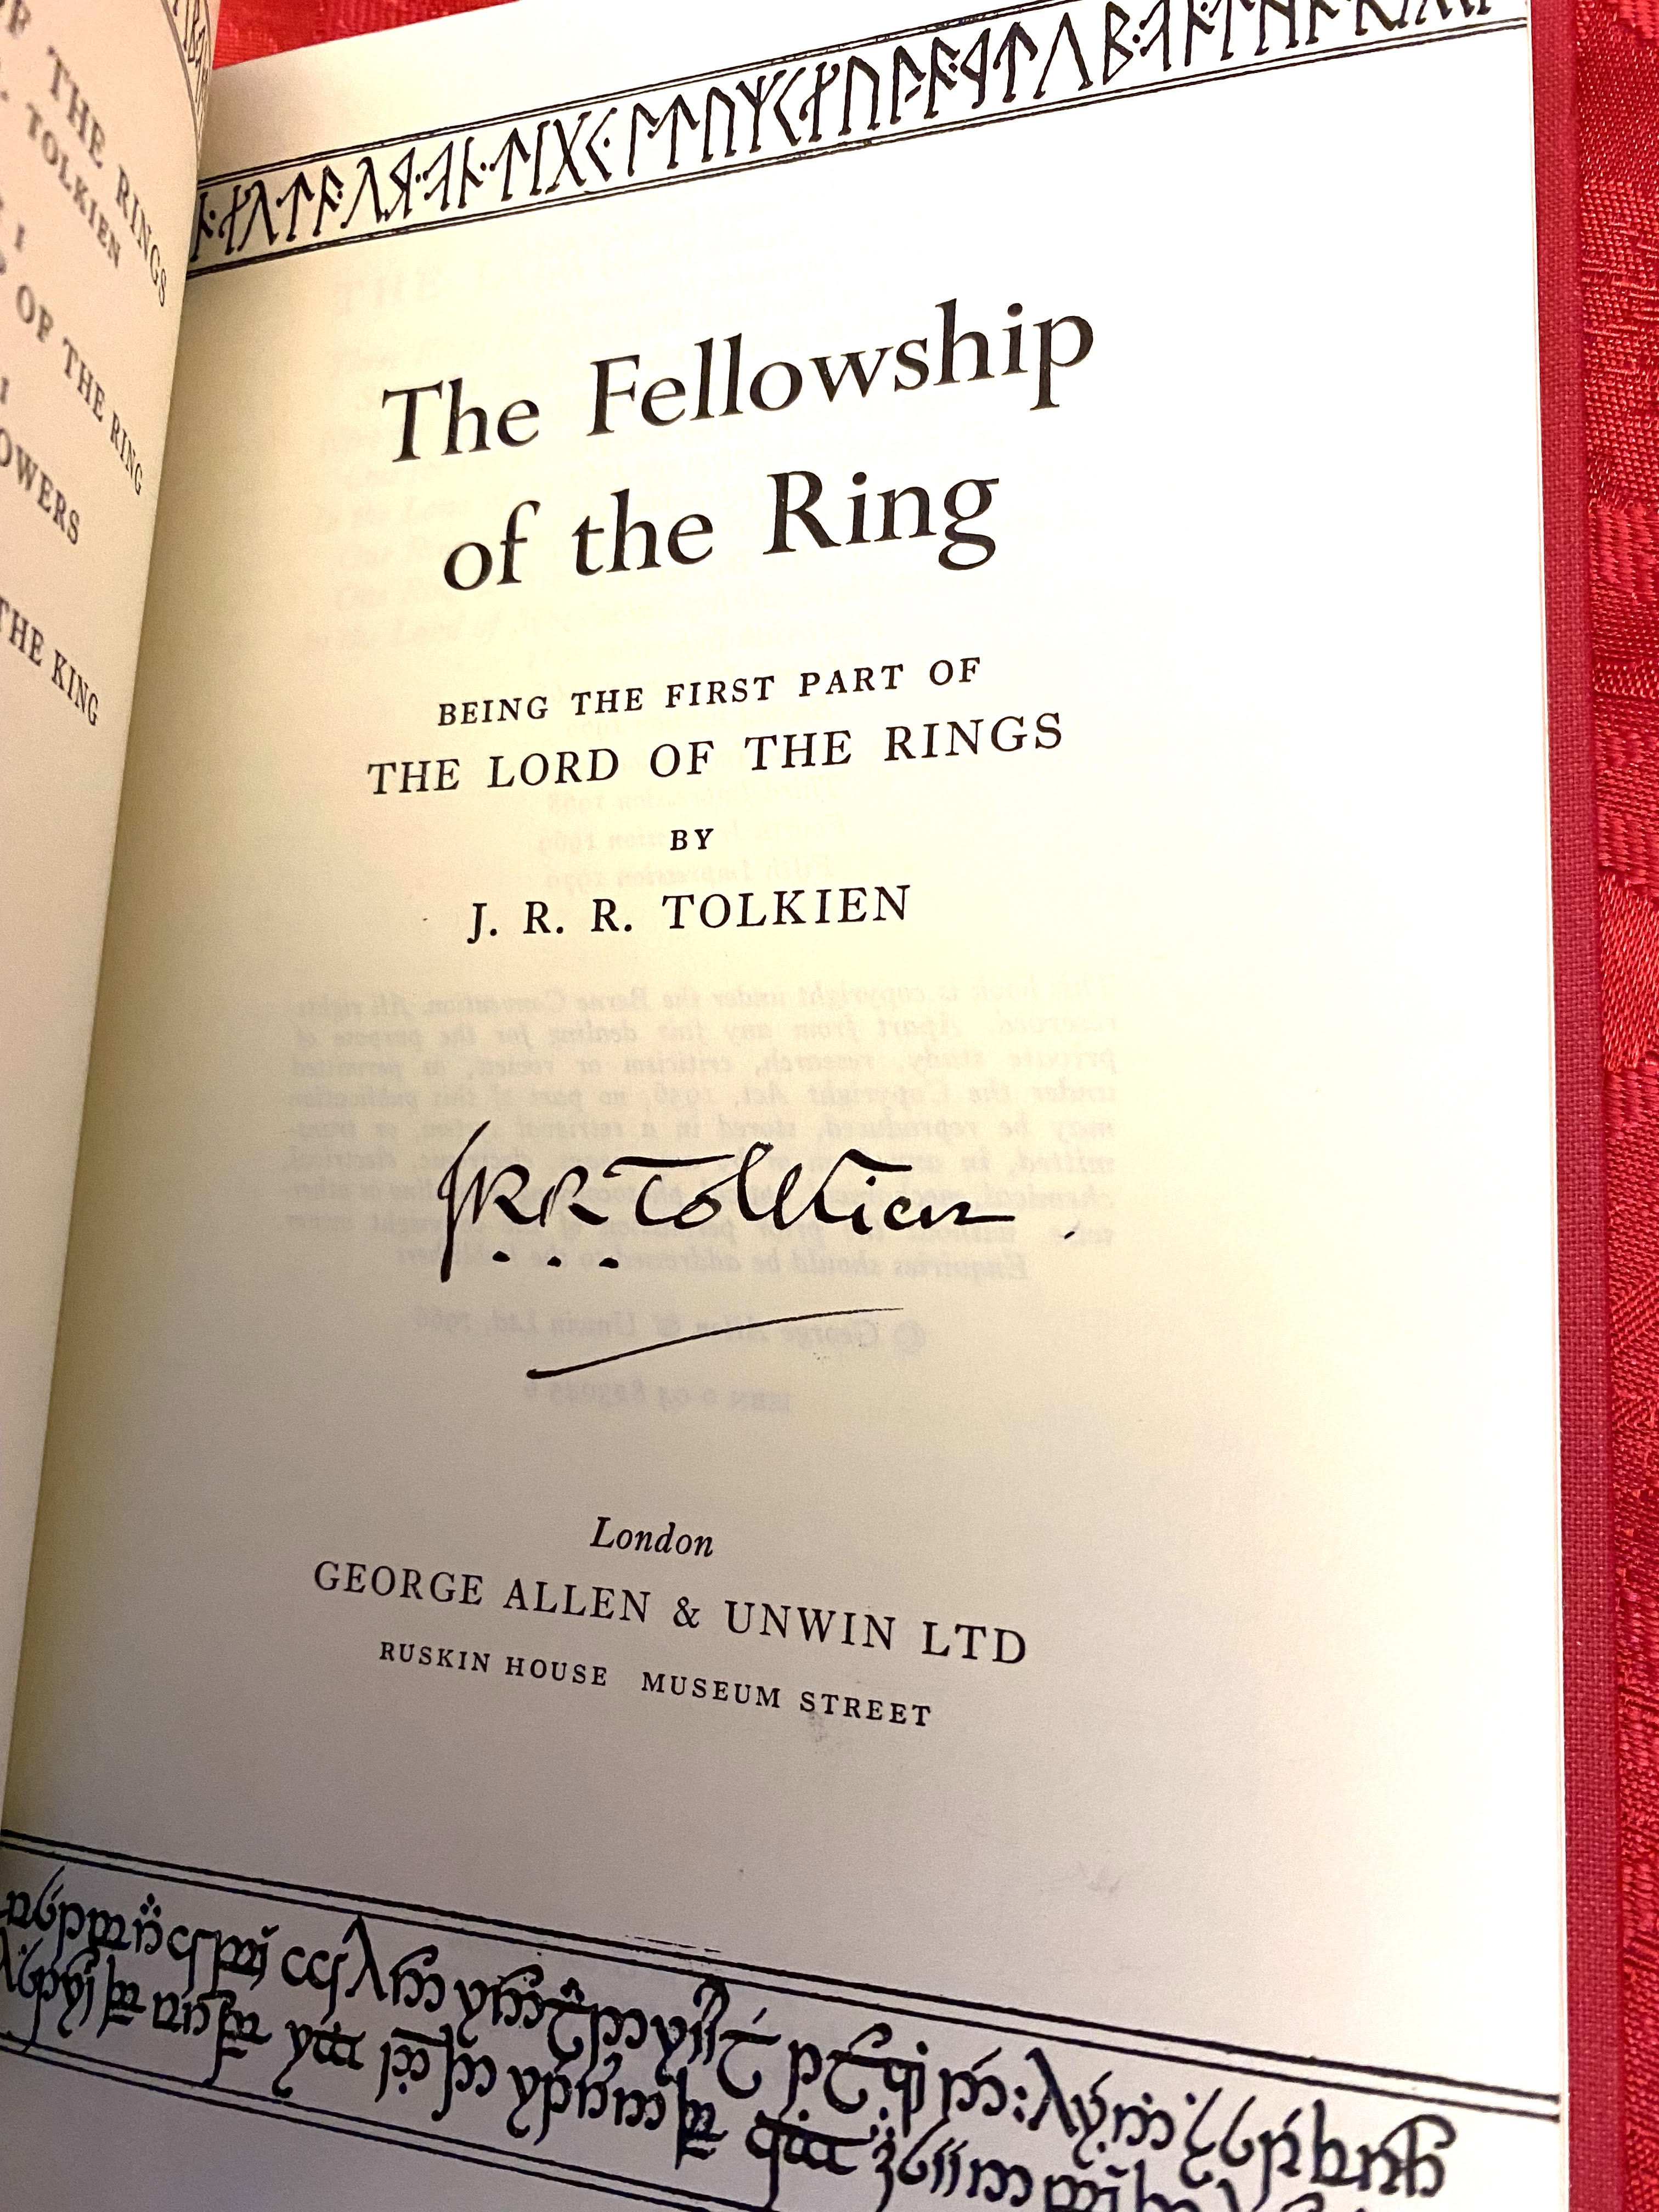 Don't miss out on this rare opportunity to own a signed 3-volume set of J.R.R. Tolkien's Lord of the Rings. Published in Britain, each volume is a Revised (2nd) Edition and personally signed by the author